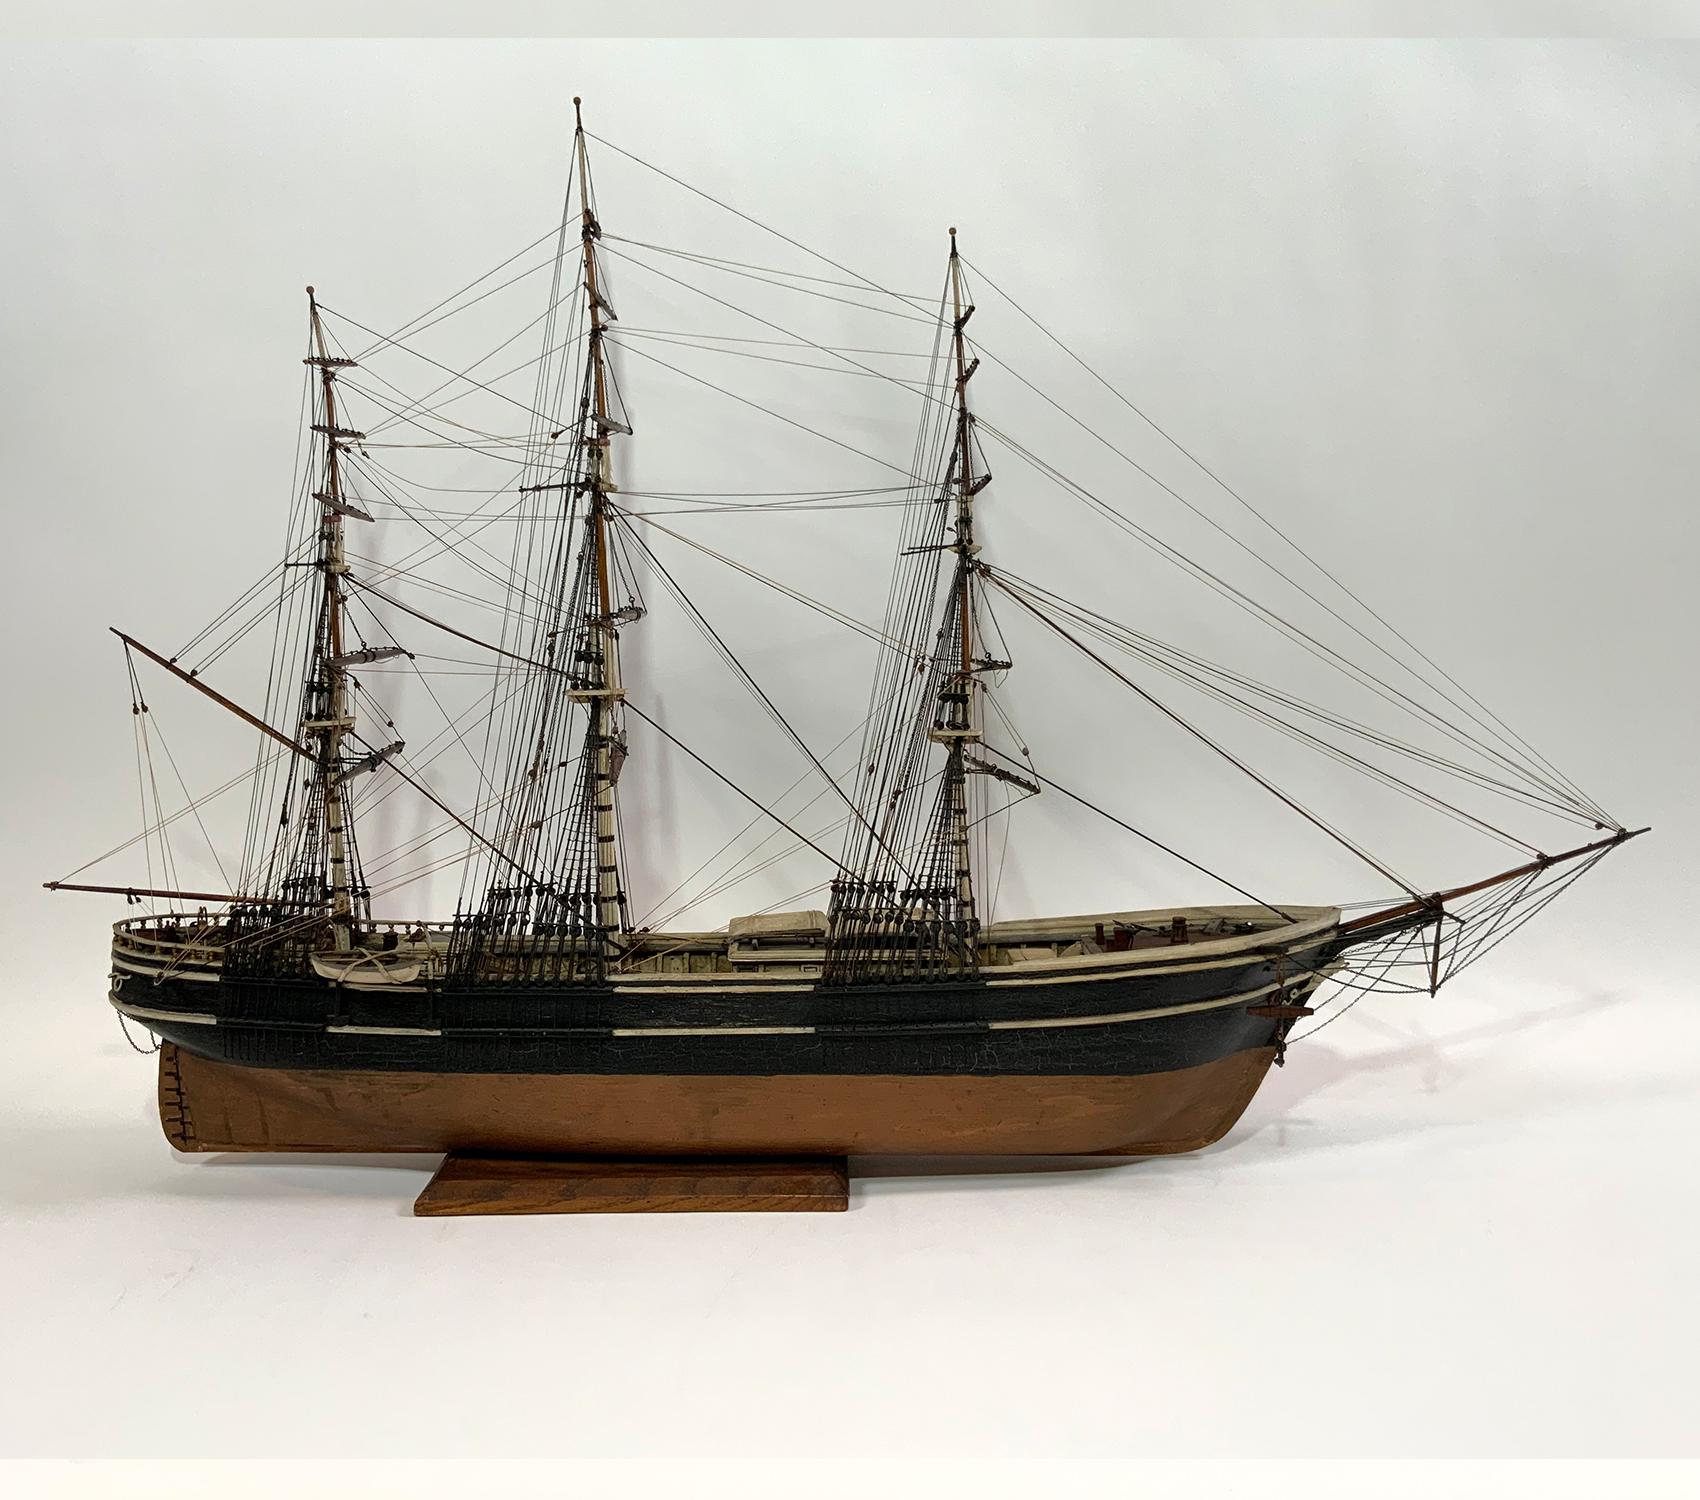 1930’s Era ship model of the Boston built American clipper ship “Flying Cloud”. This is a well-executed model from the 1930s. the carved wood hull has a scribed deck with varnish finish. Built up cabins and hatches are on deck. At the forward deck